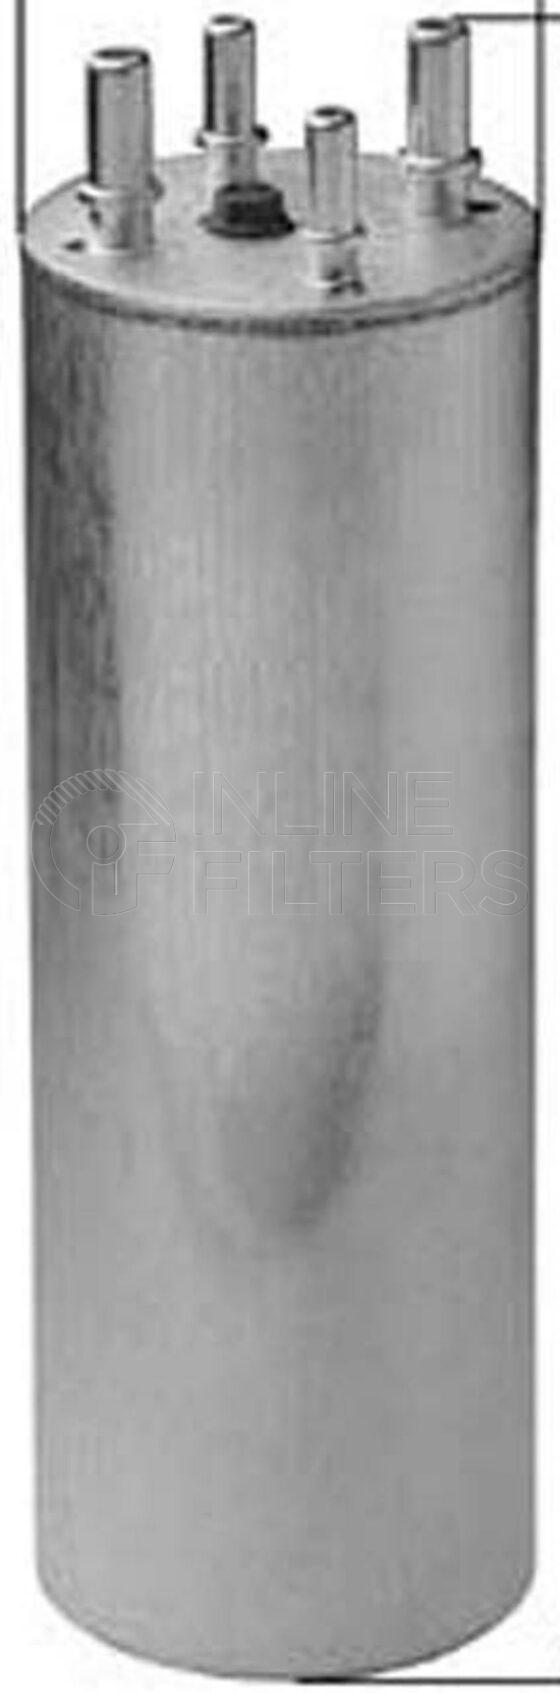 Inline FF30680. Fuel Filter Product – Push On – Round Product Fuel filter product